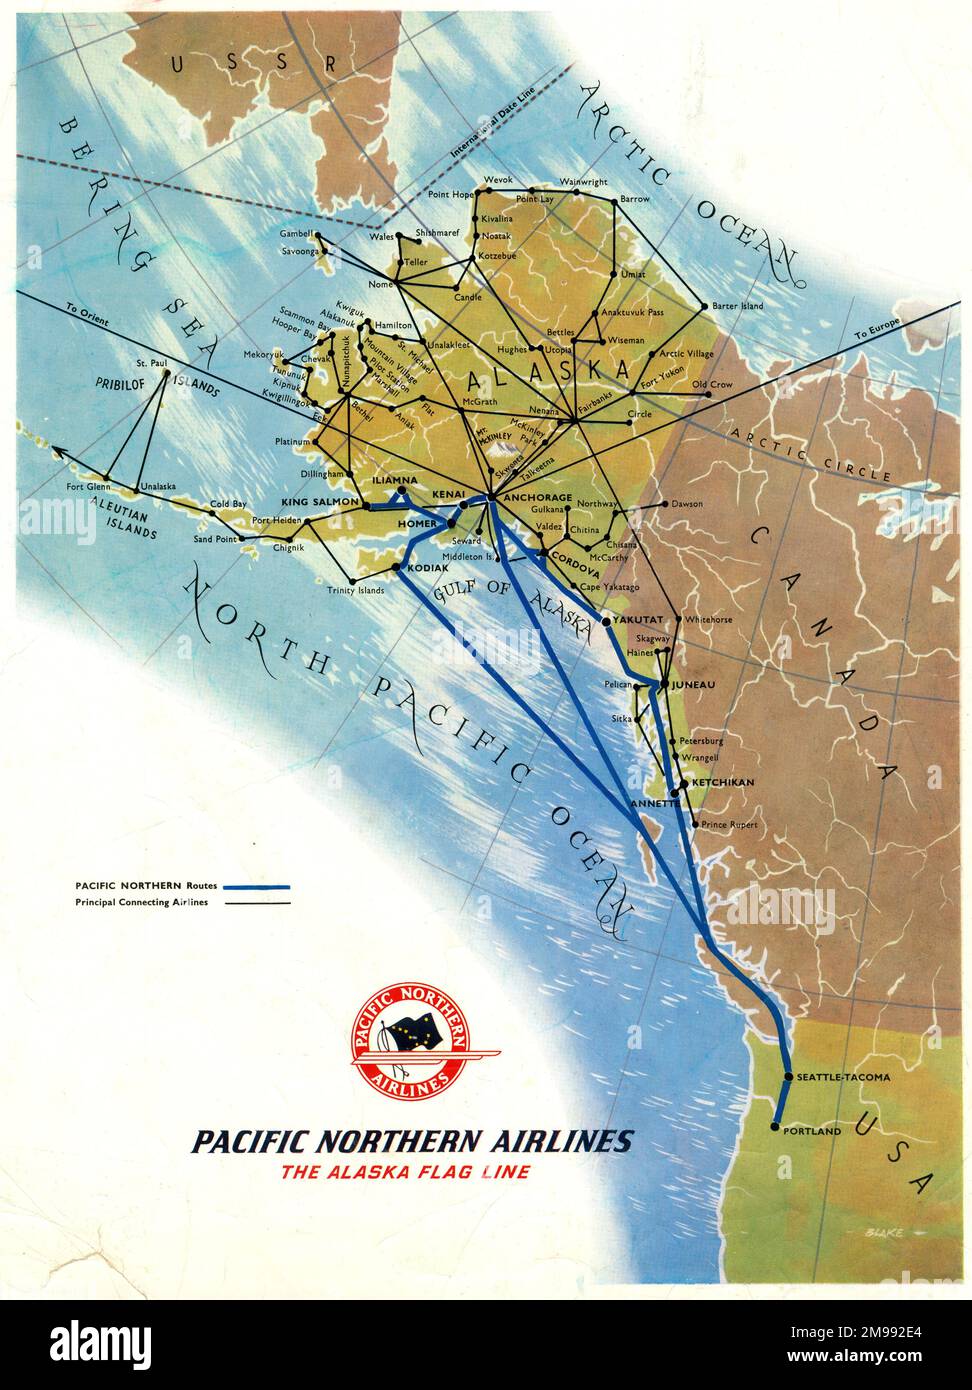 Poster, Pacific Northern Airlines, The Alaska Flag Line, with a map showing routes. Stock Photo